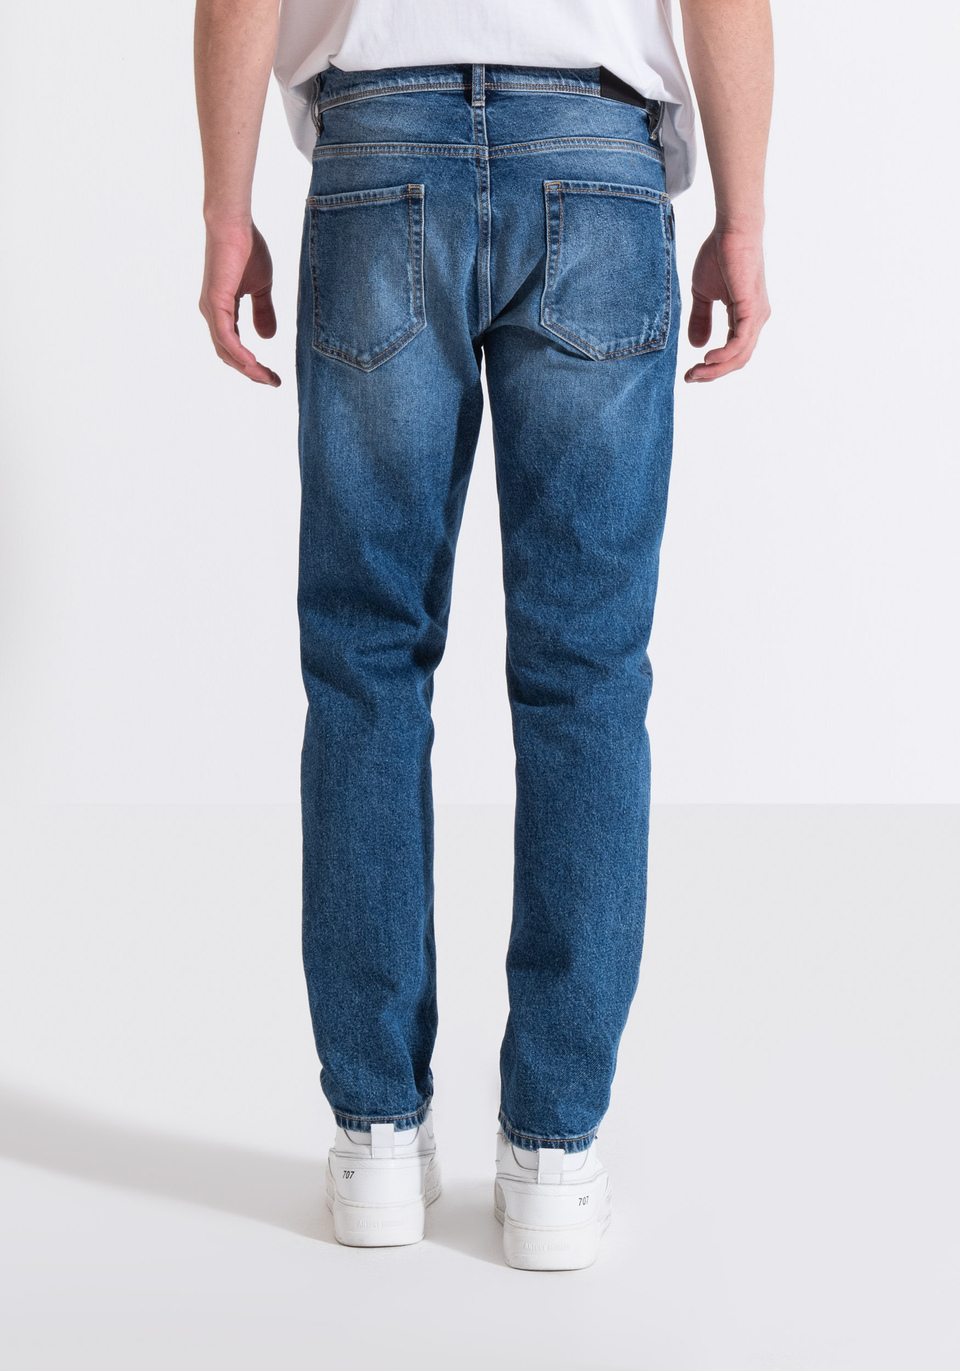 SLIM FIT "LAURENT" JEANS IN COMFORT DENIM WITH TOBACCO COLORED STITCHING - Antony Morato Online Shop